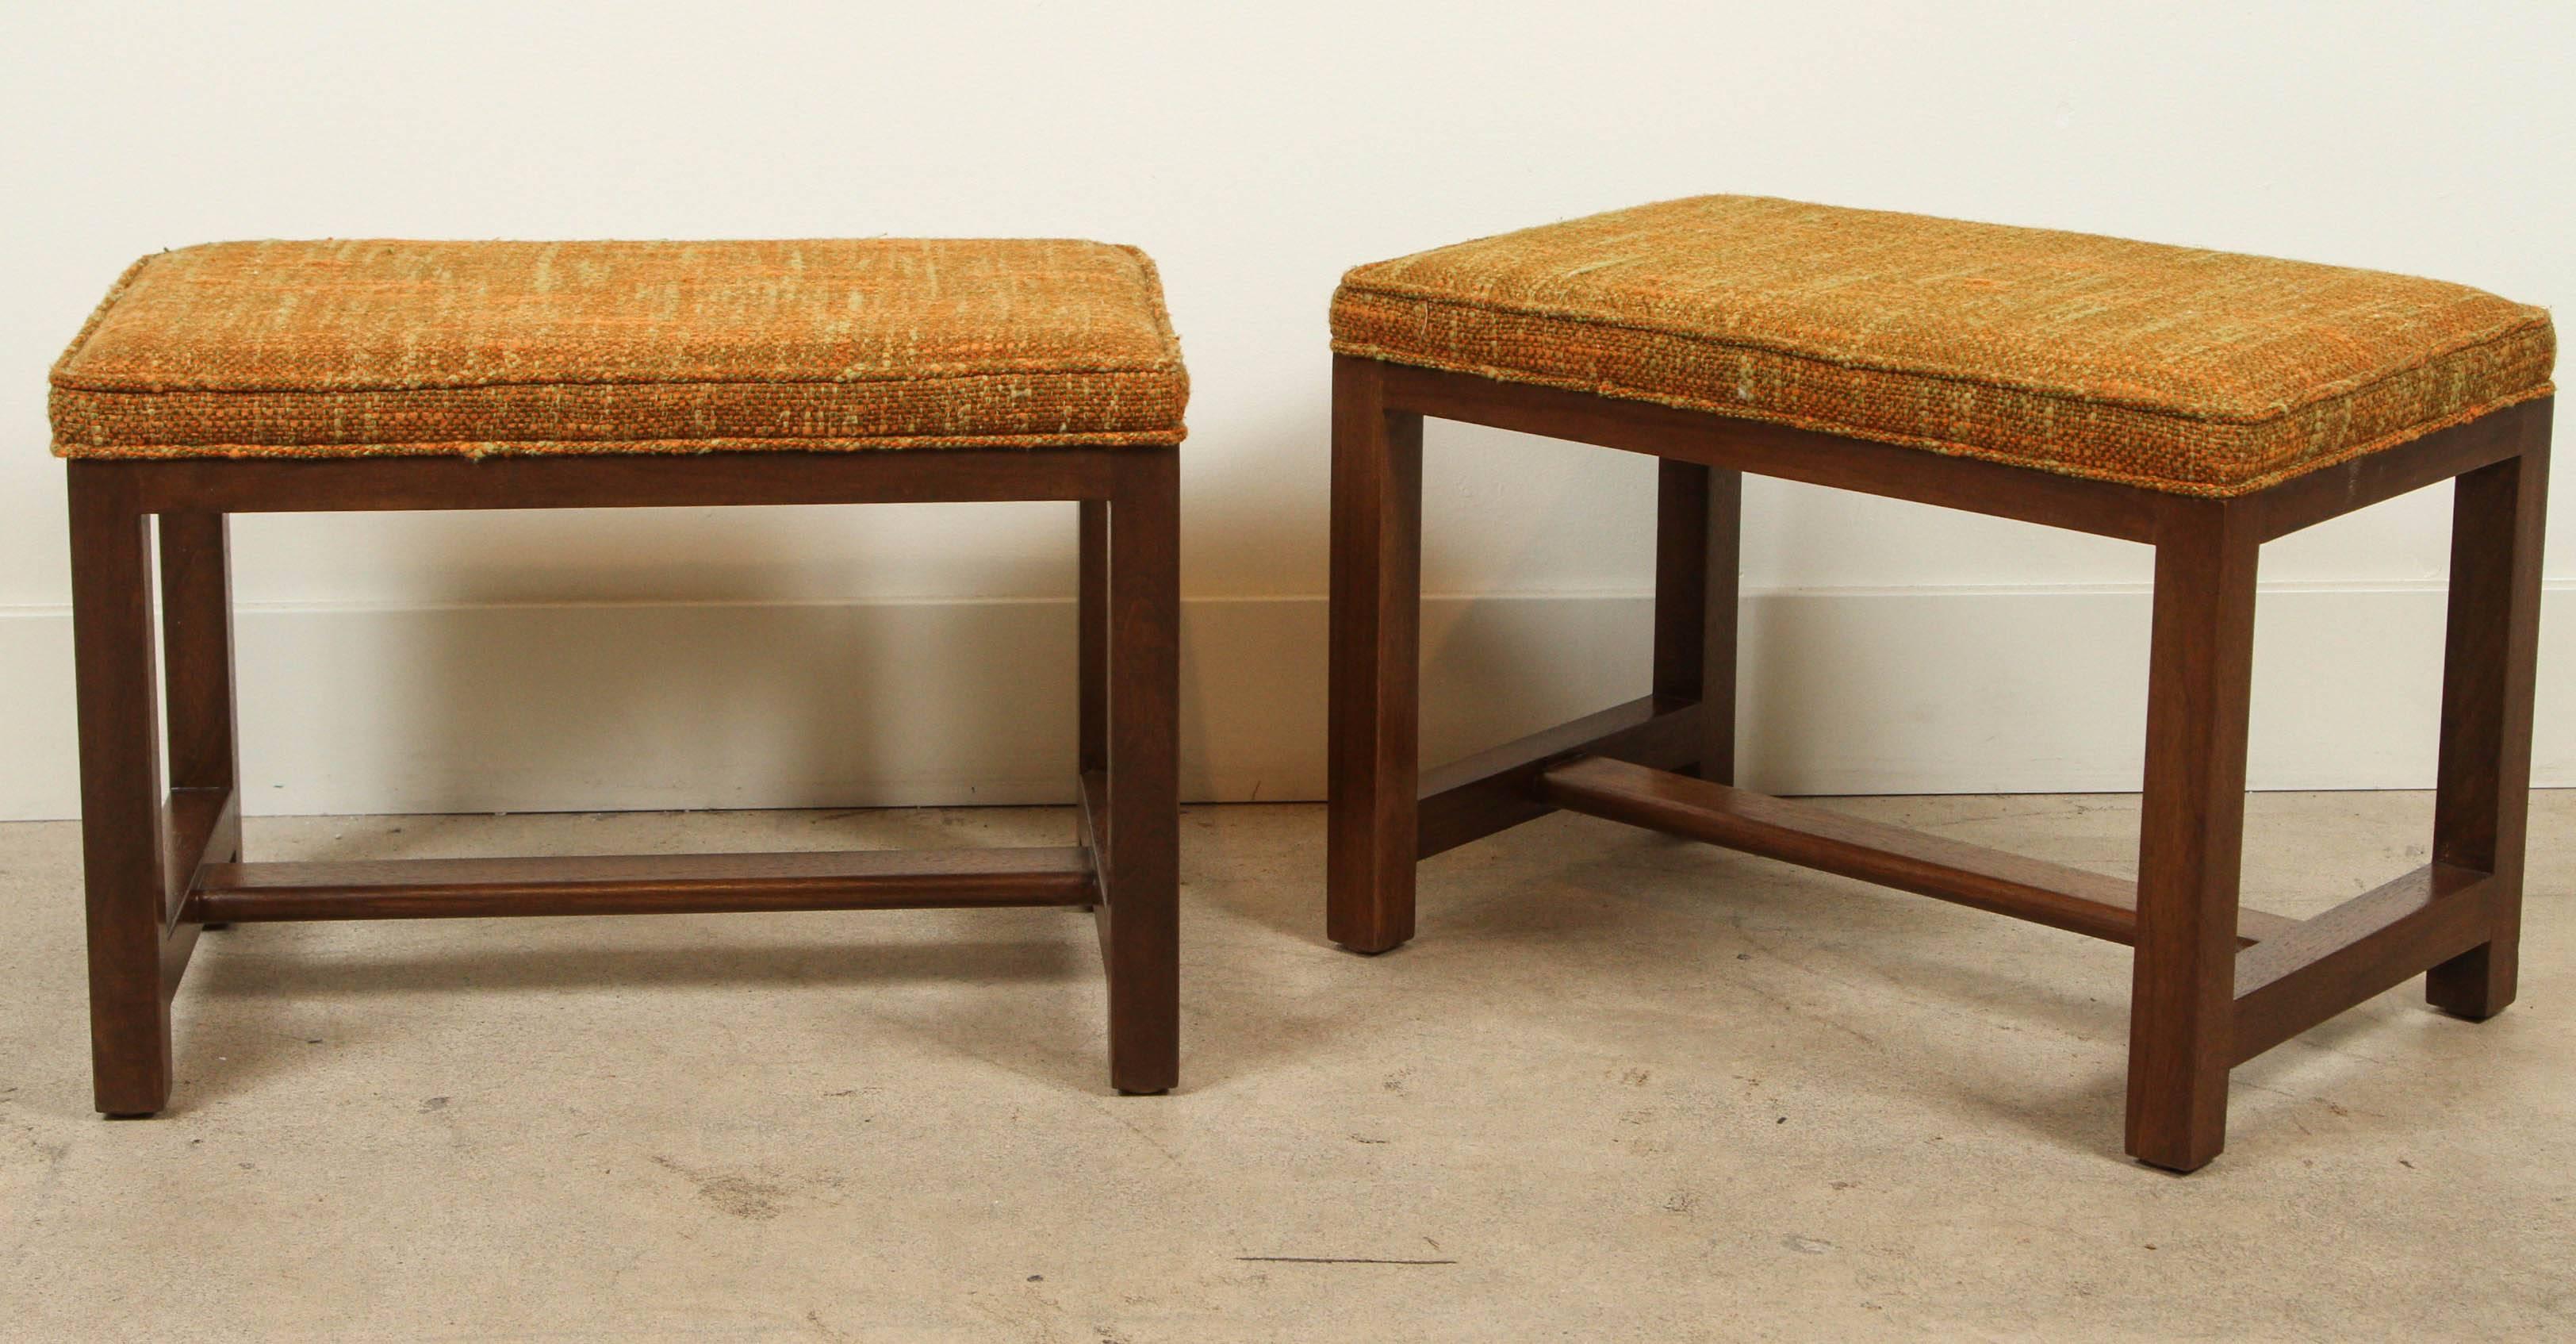 Pair of ottomans by Edward Wormley for Dunbar. Signed with brass D medallion.